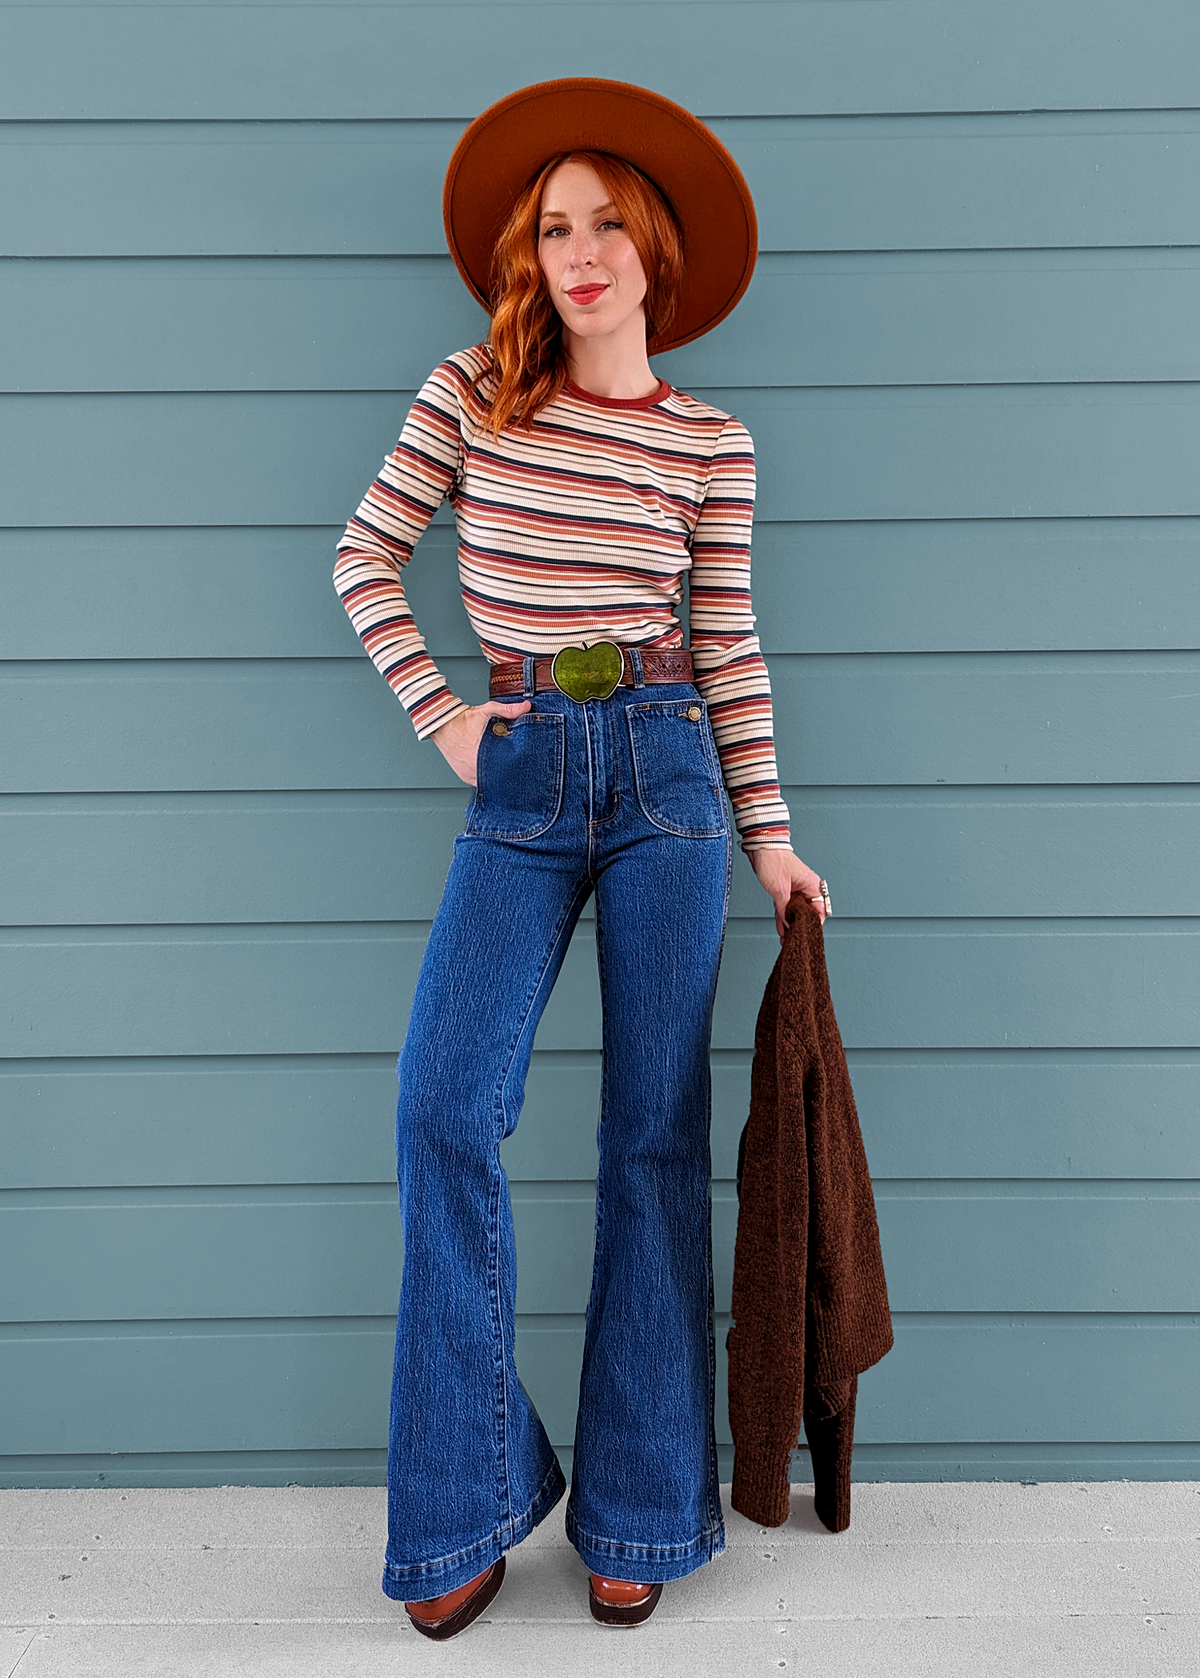 70s inspired organic cotton stretch Charlotte blue denim Eastcoast Flares with high rise waist and patch front pockets by Rolla's Jeans